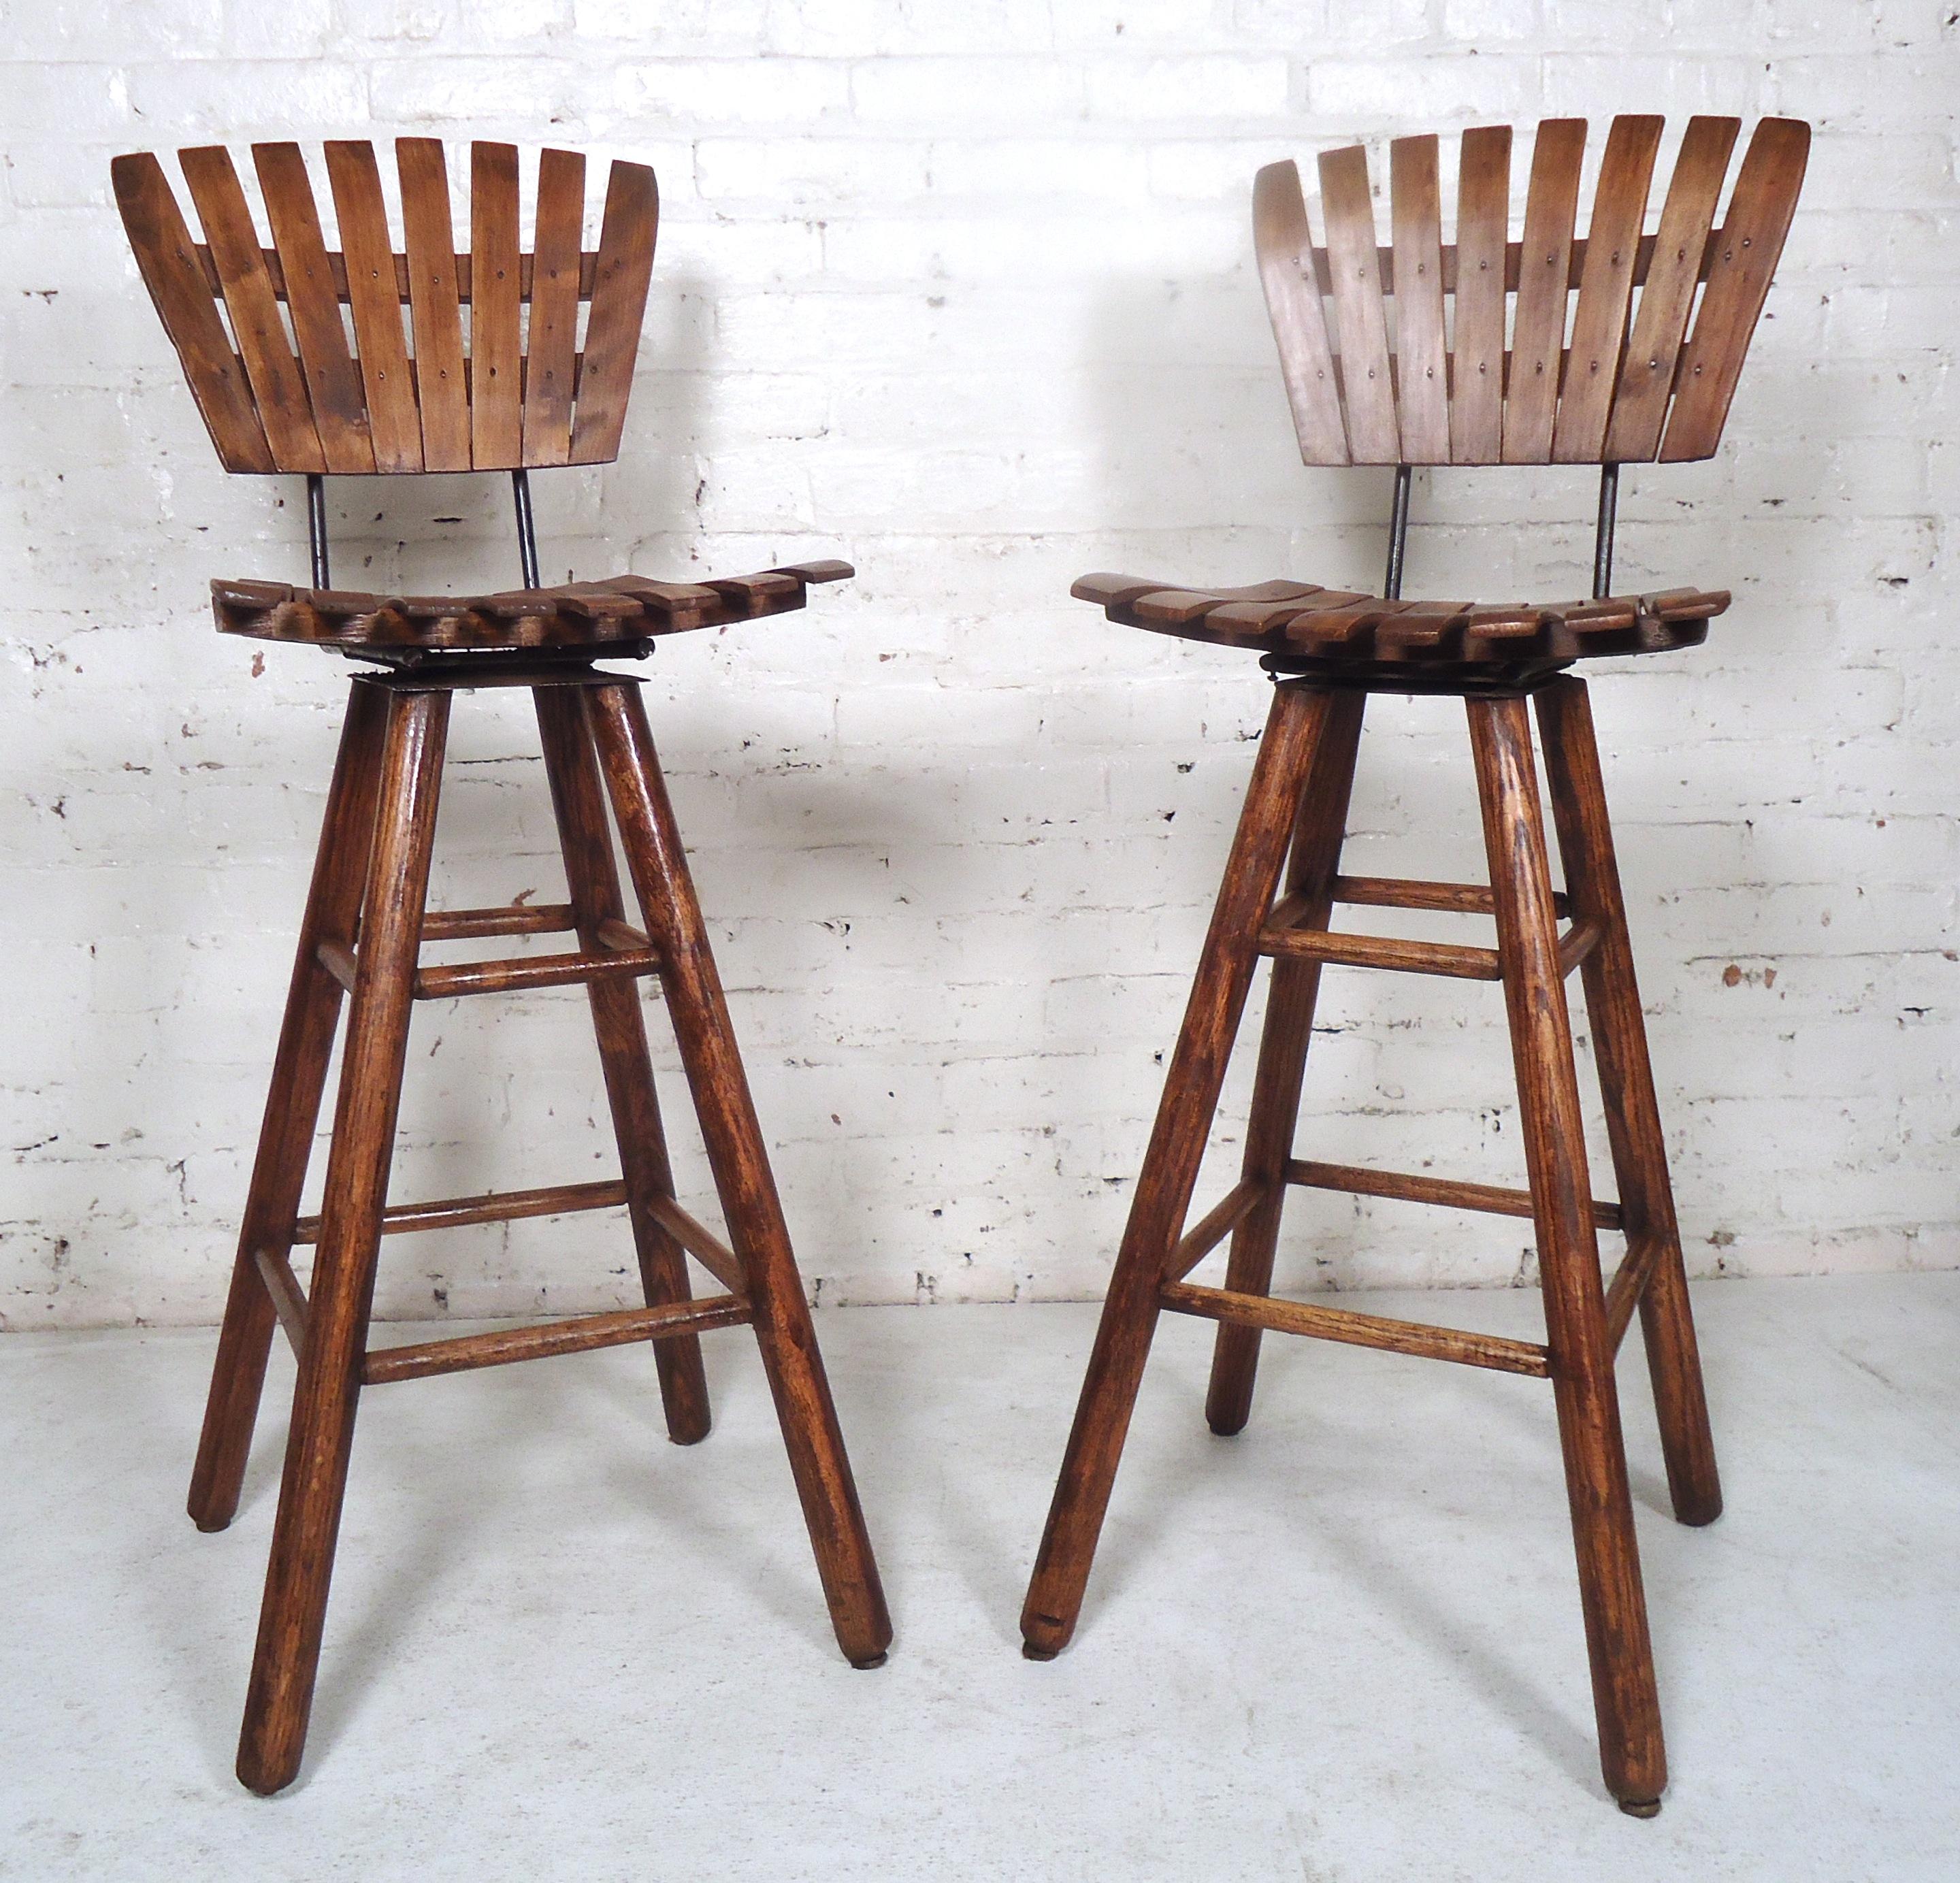 Pair of vintage modern slat stools tall and comfortable design perfect for kitchen use features and iron frame with sturdy wooden legs.

(Please confirm item location - NY or NJ - with dealer).
 